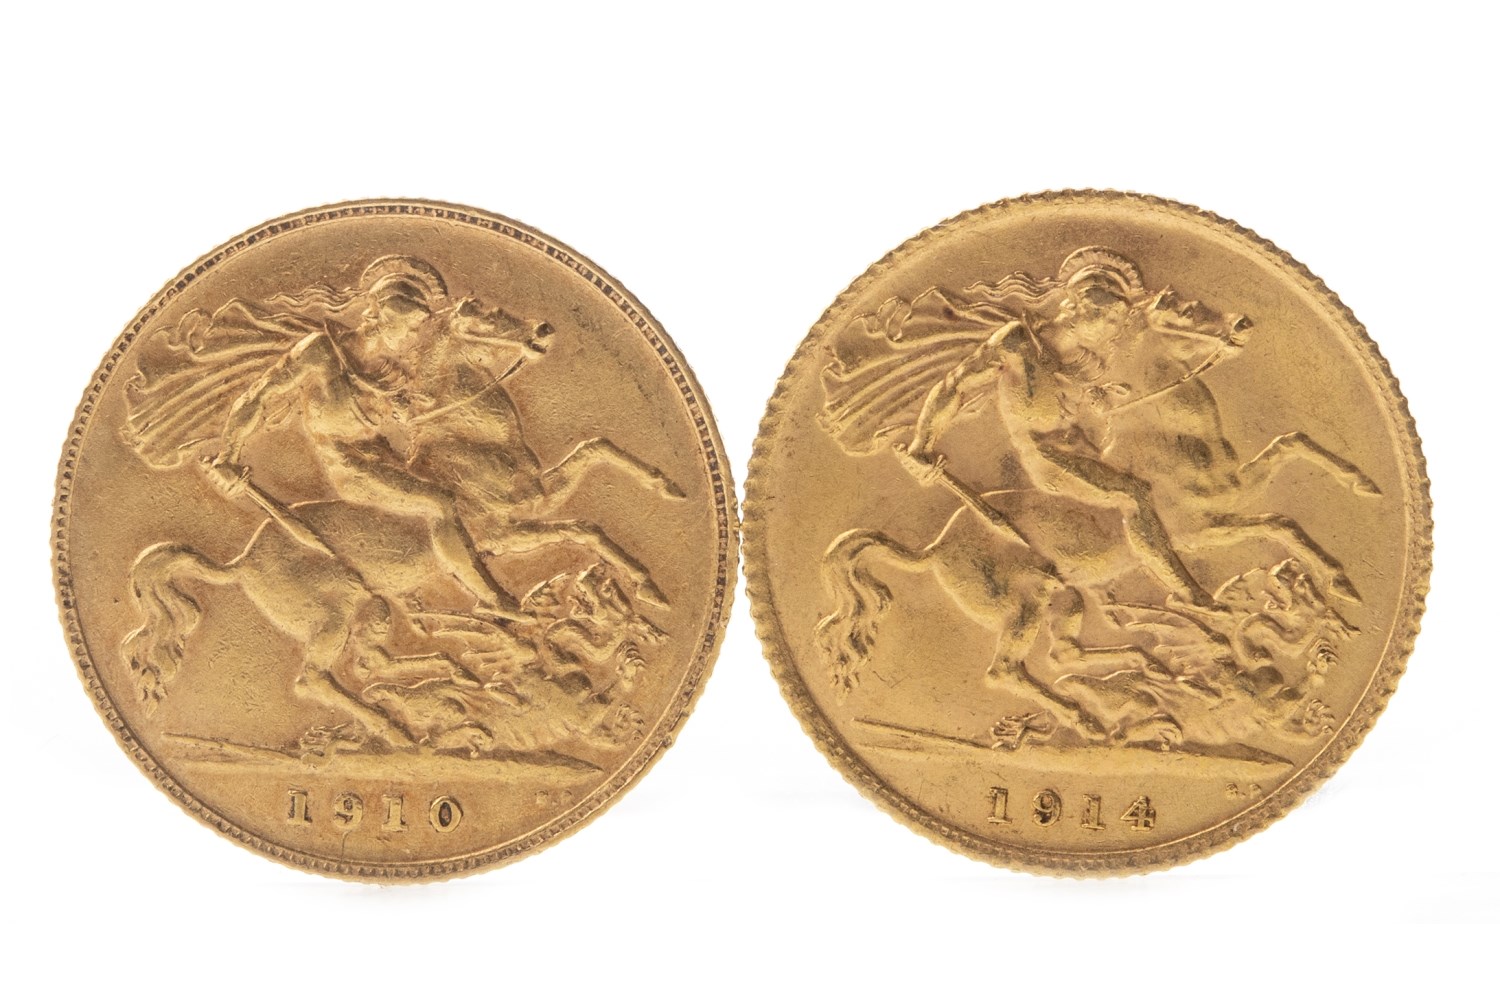 TWO GOLD HALF SOVEREIGNS, 1910 AND 1914